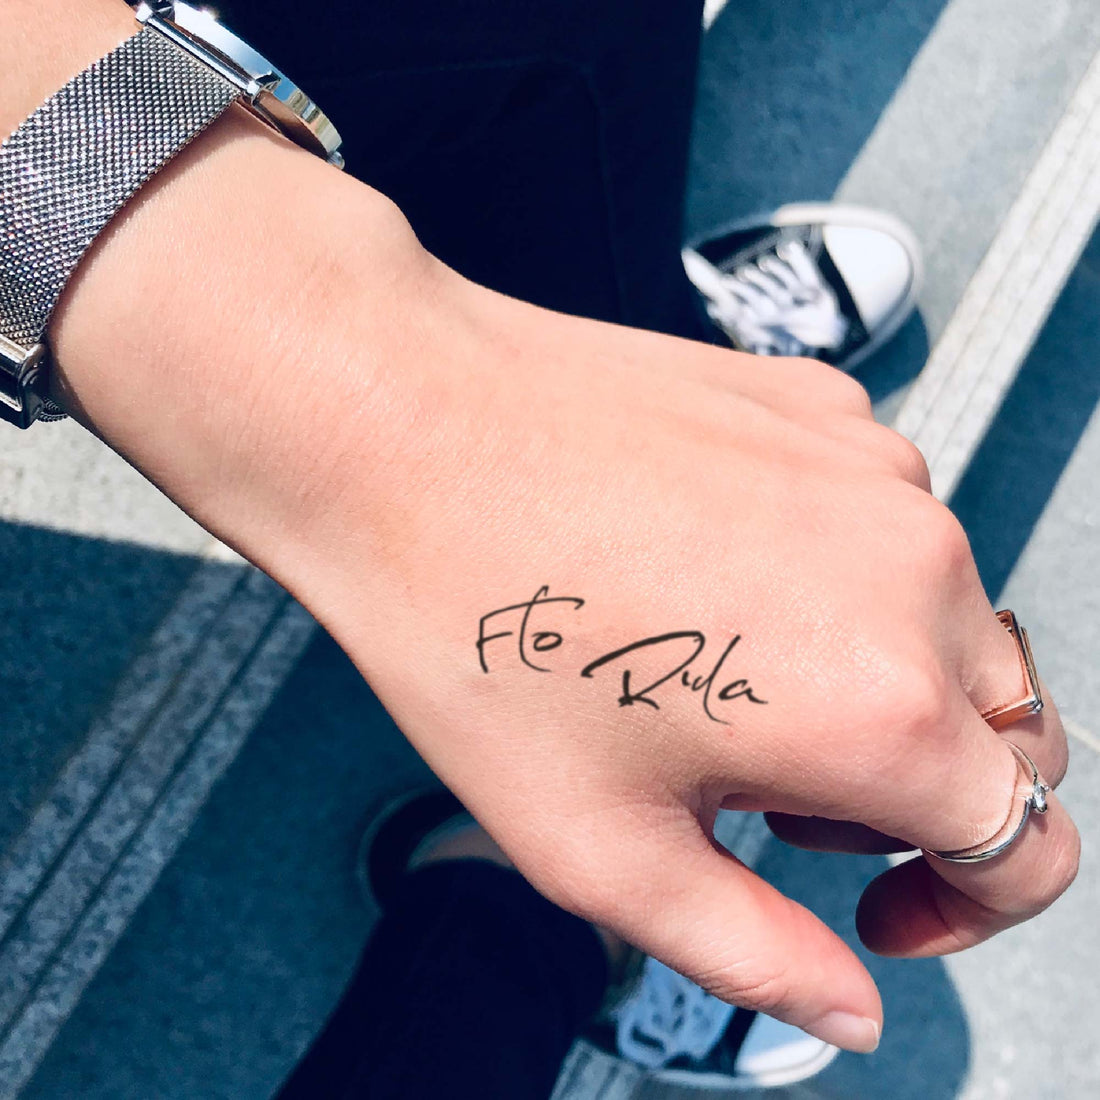 Flo Rida custom temporary tattoo sticker design idea inspiration meanings removal arm wrist hand words font name signature calligraphy lyrics tour concert outfits merch accessory gift souvenir costumes wear dress up code